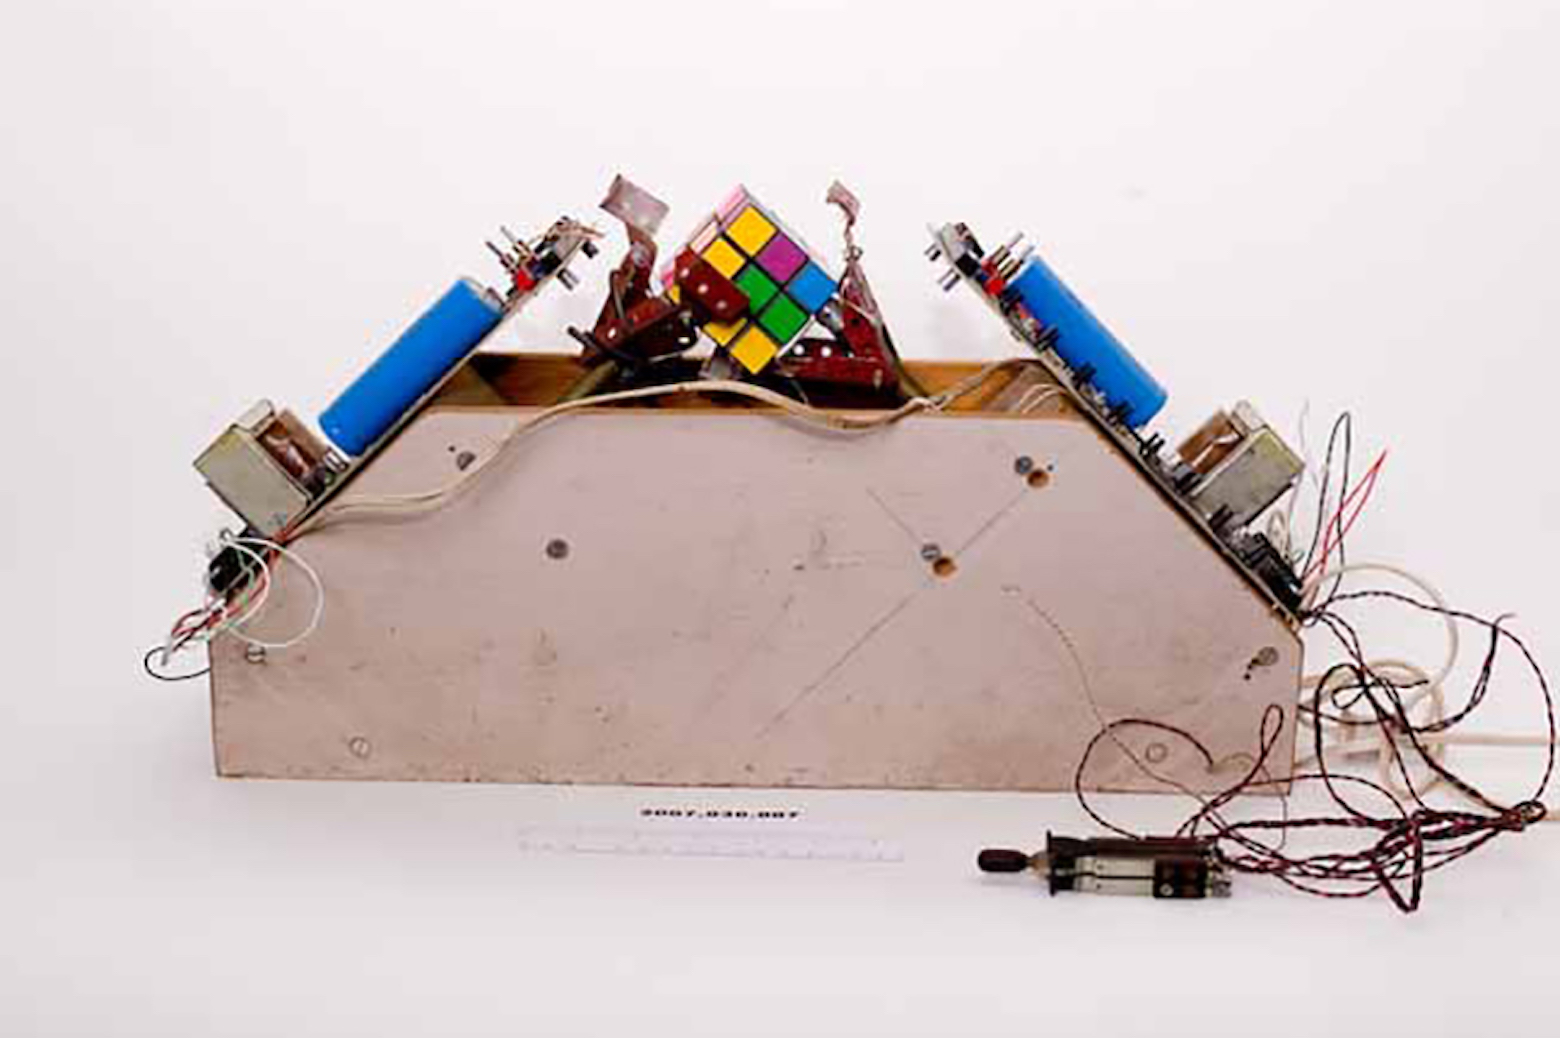 A device that mechanically solves rubiks cubes